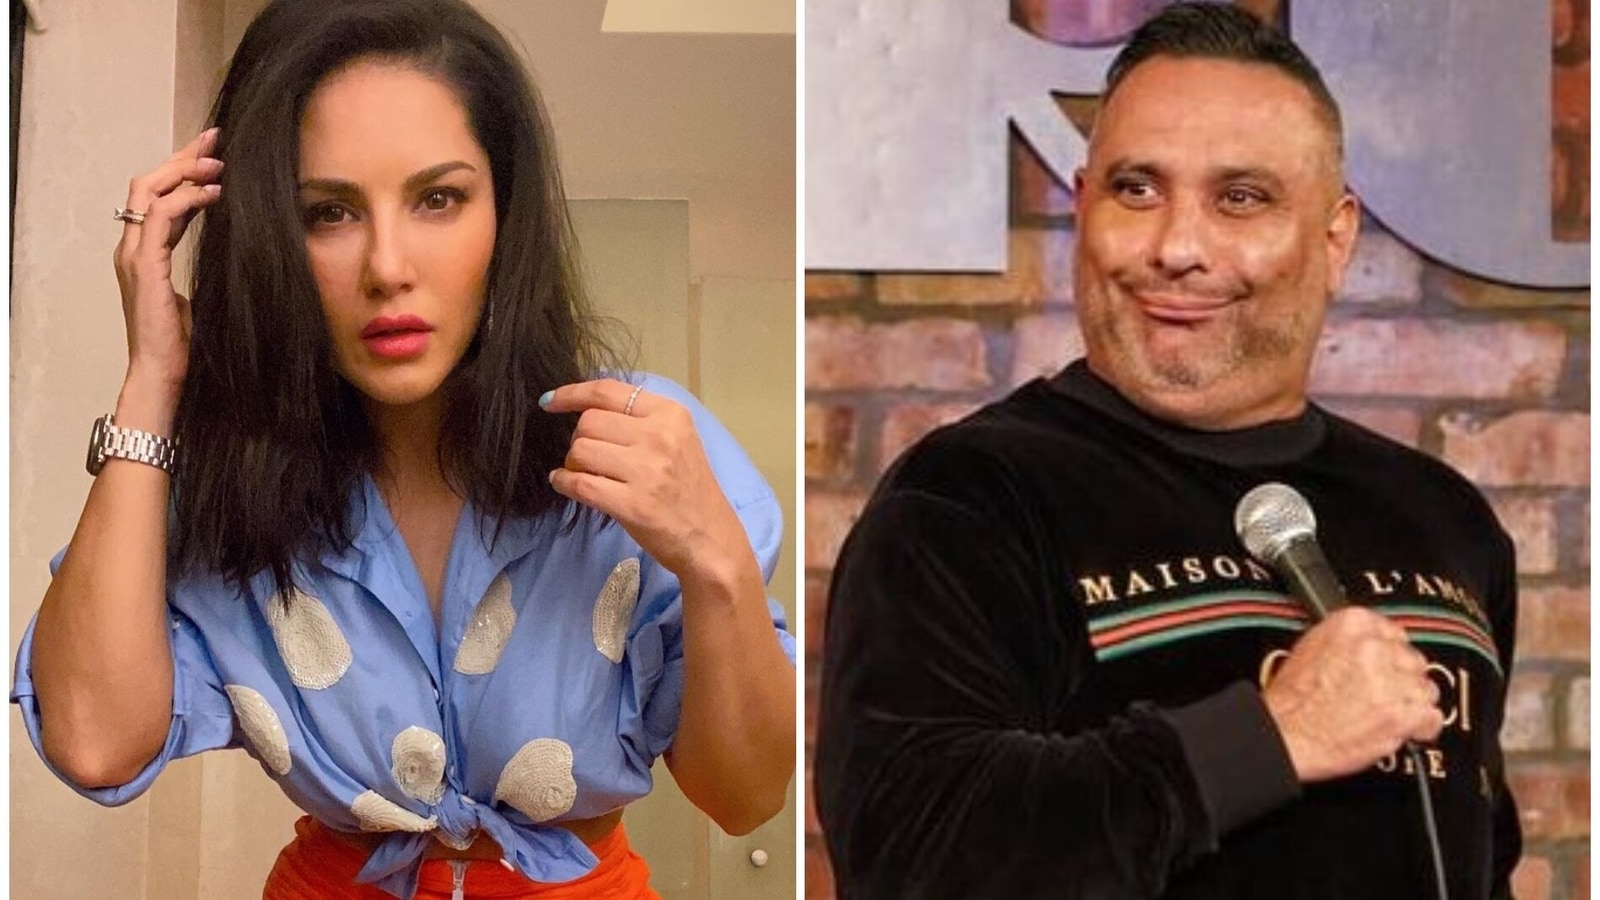 Sani Leone And Boyfriend Faking Video - Sunny Leone recalls relationship with Russell Peters that lasted 'a hot  second': 'It was the worst thing ever' - Hindustan Times